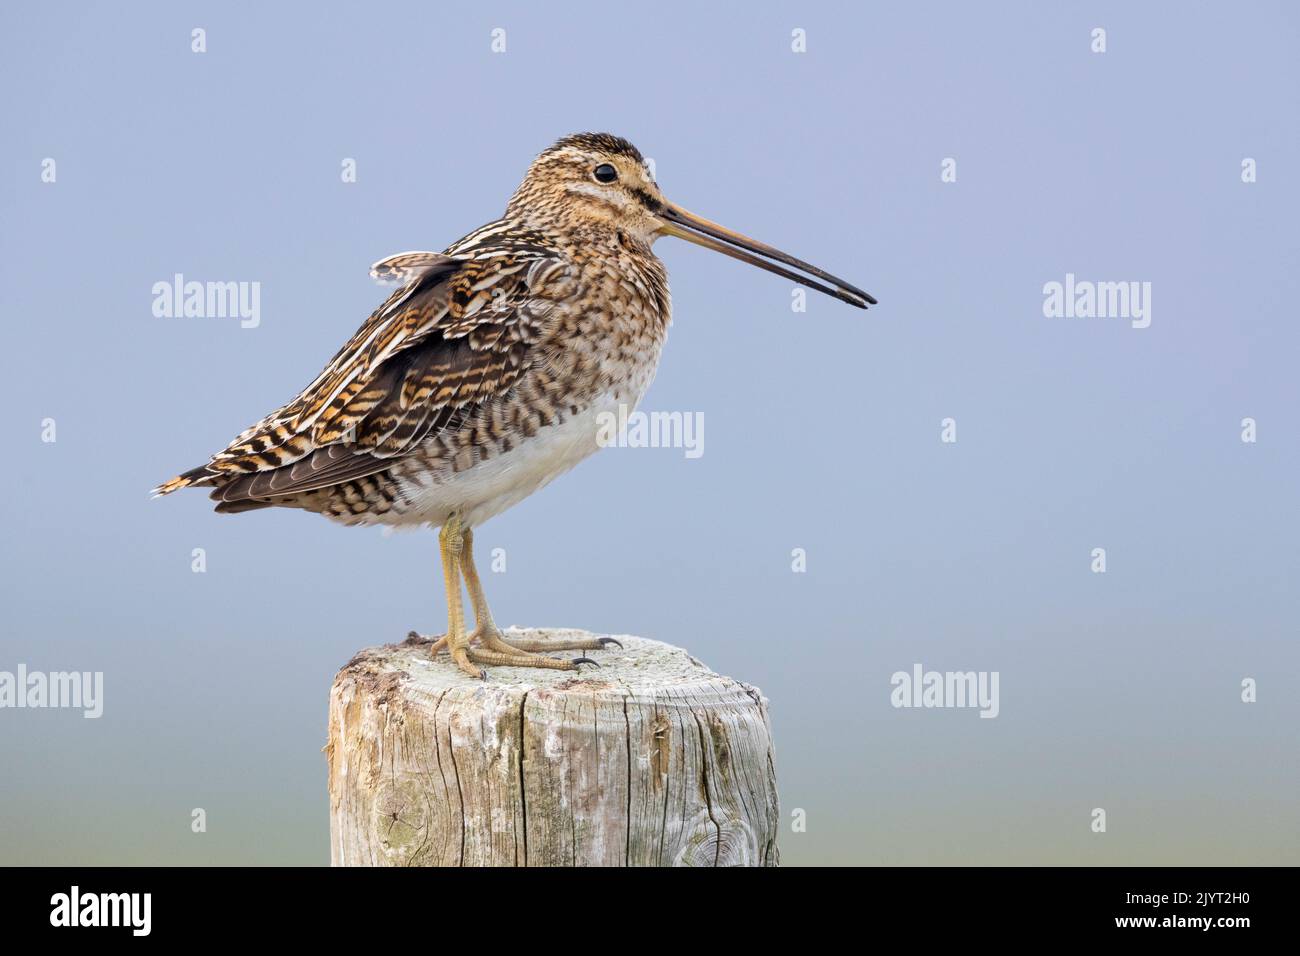 Common Snipe (Gallinago gallinago faeroeensis), side view of an adult standing on a fence post, Southern Region, Iceland Stock Photo